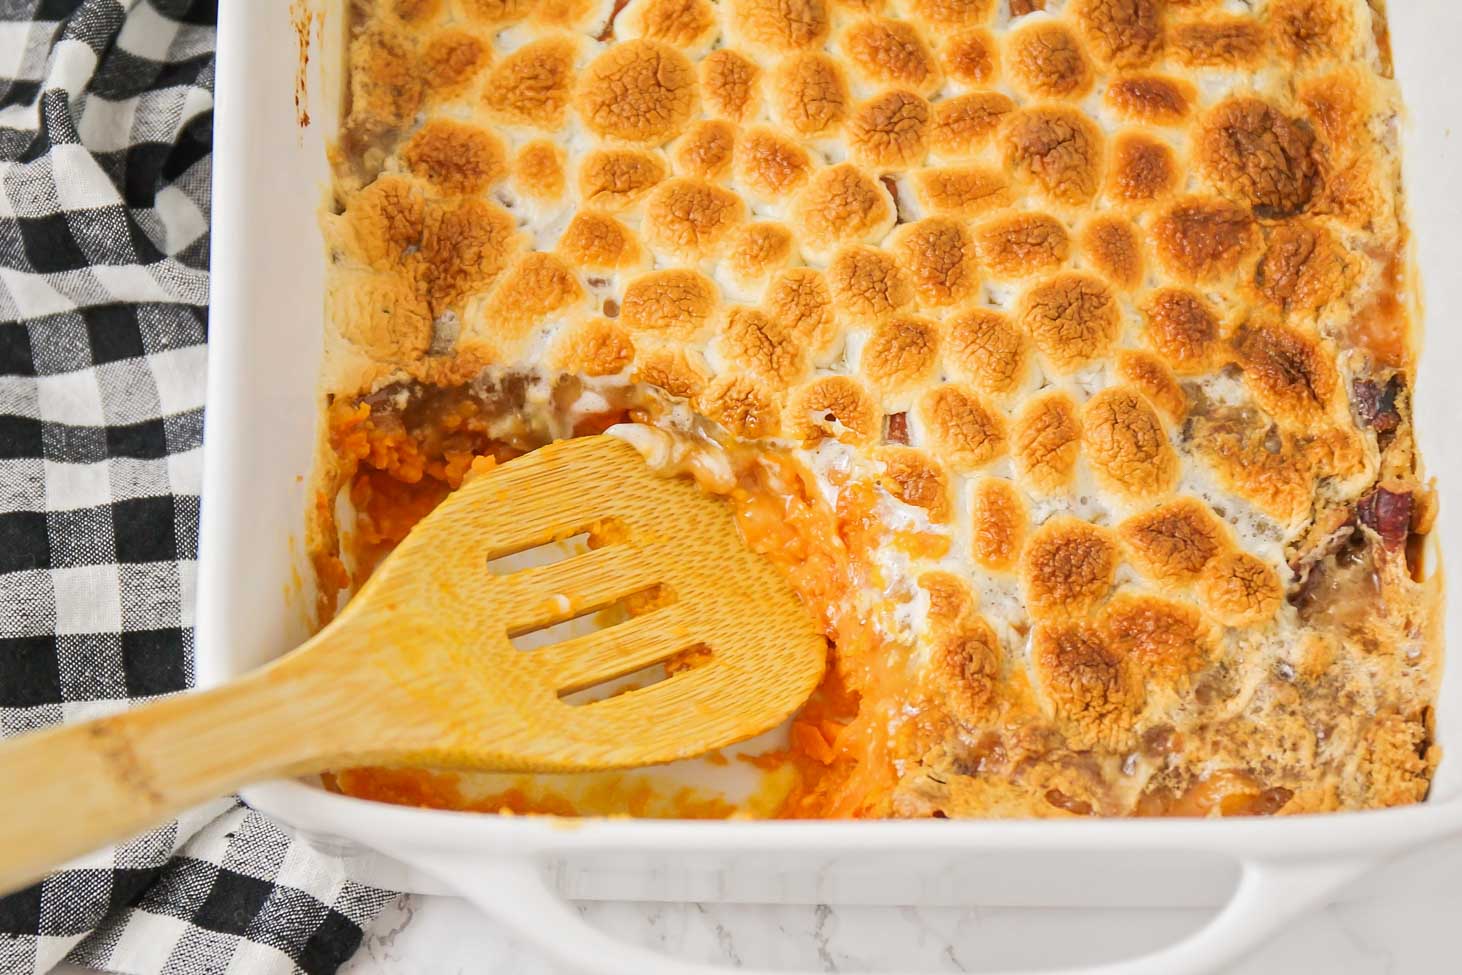 Thanksgiving dinner ideas - sweet potato casserole with marshmallows, with a scoop missing.